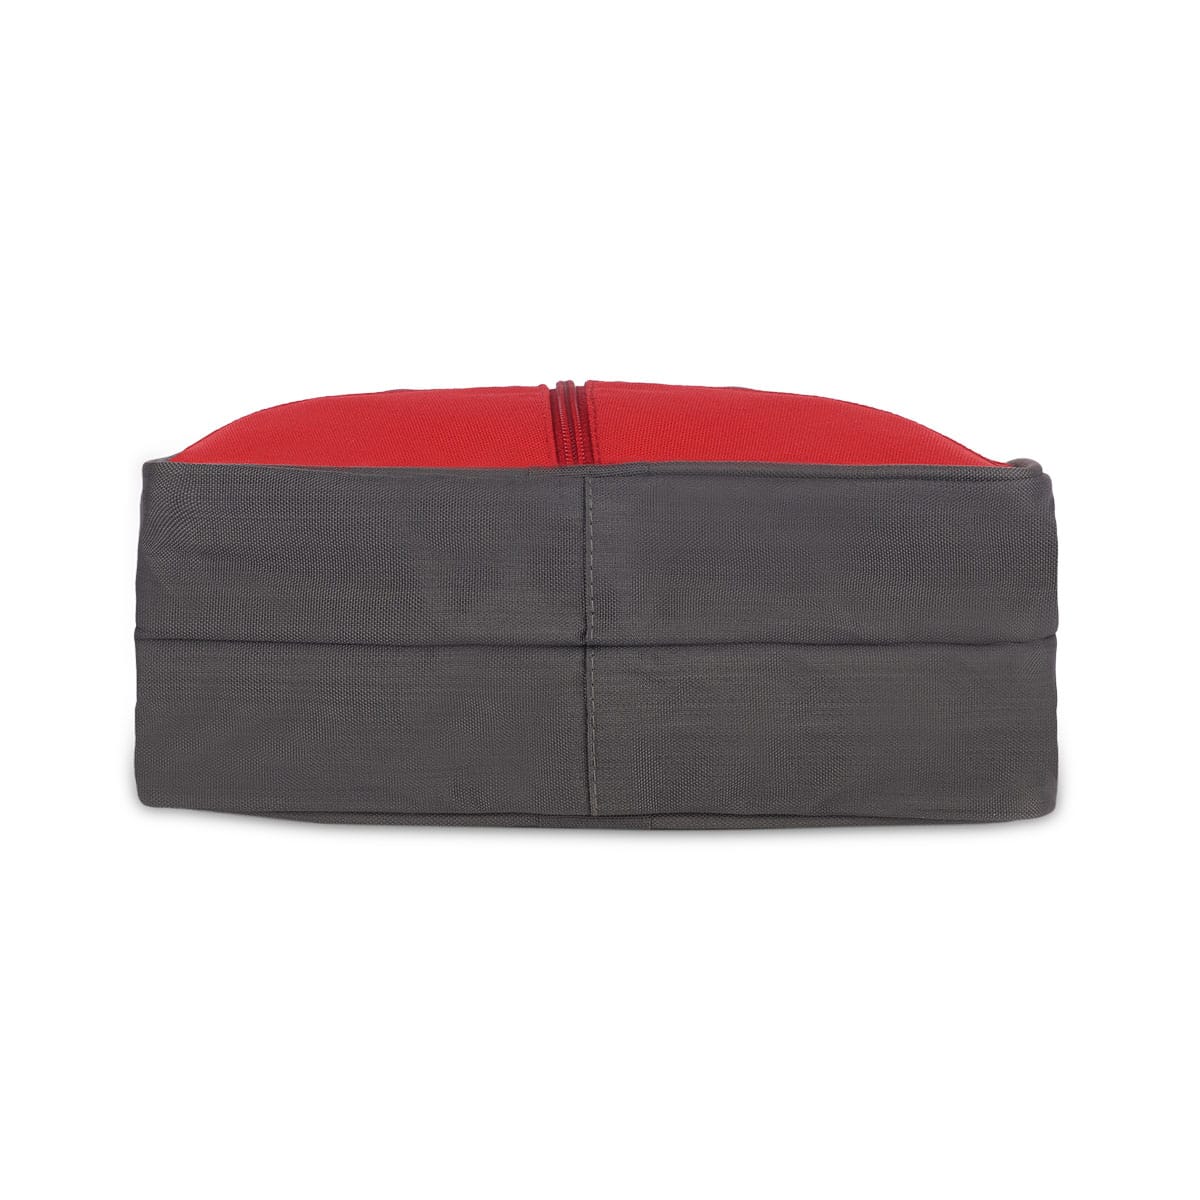 Grey-Red | Protecta Boost Shoe Bag-4